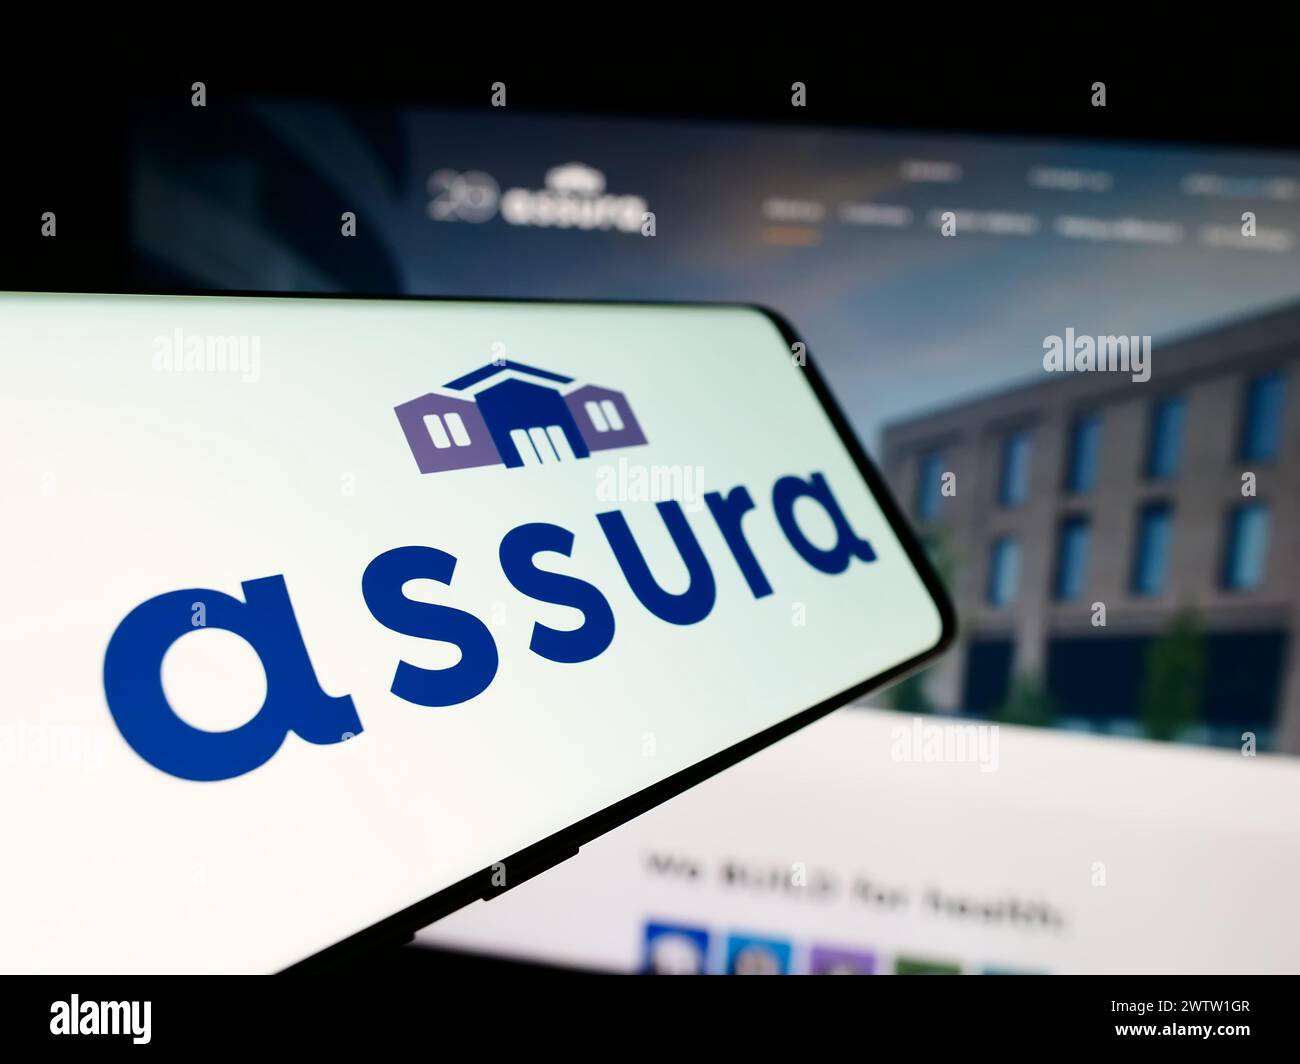 Mobile phone with logo of British healthcare real estate company Assura plc in front of business website. Focus on center-left of phone display. Stock Photo